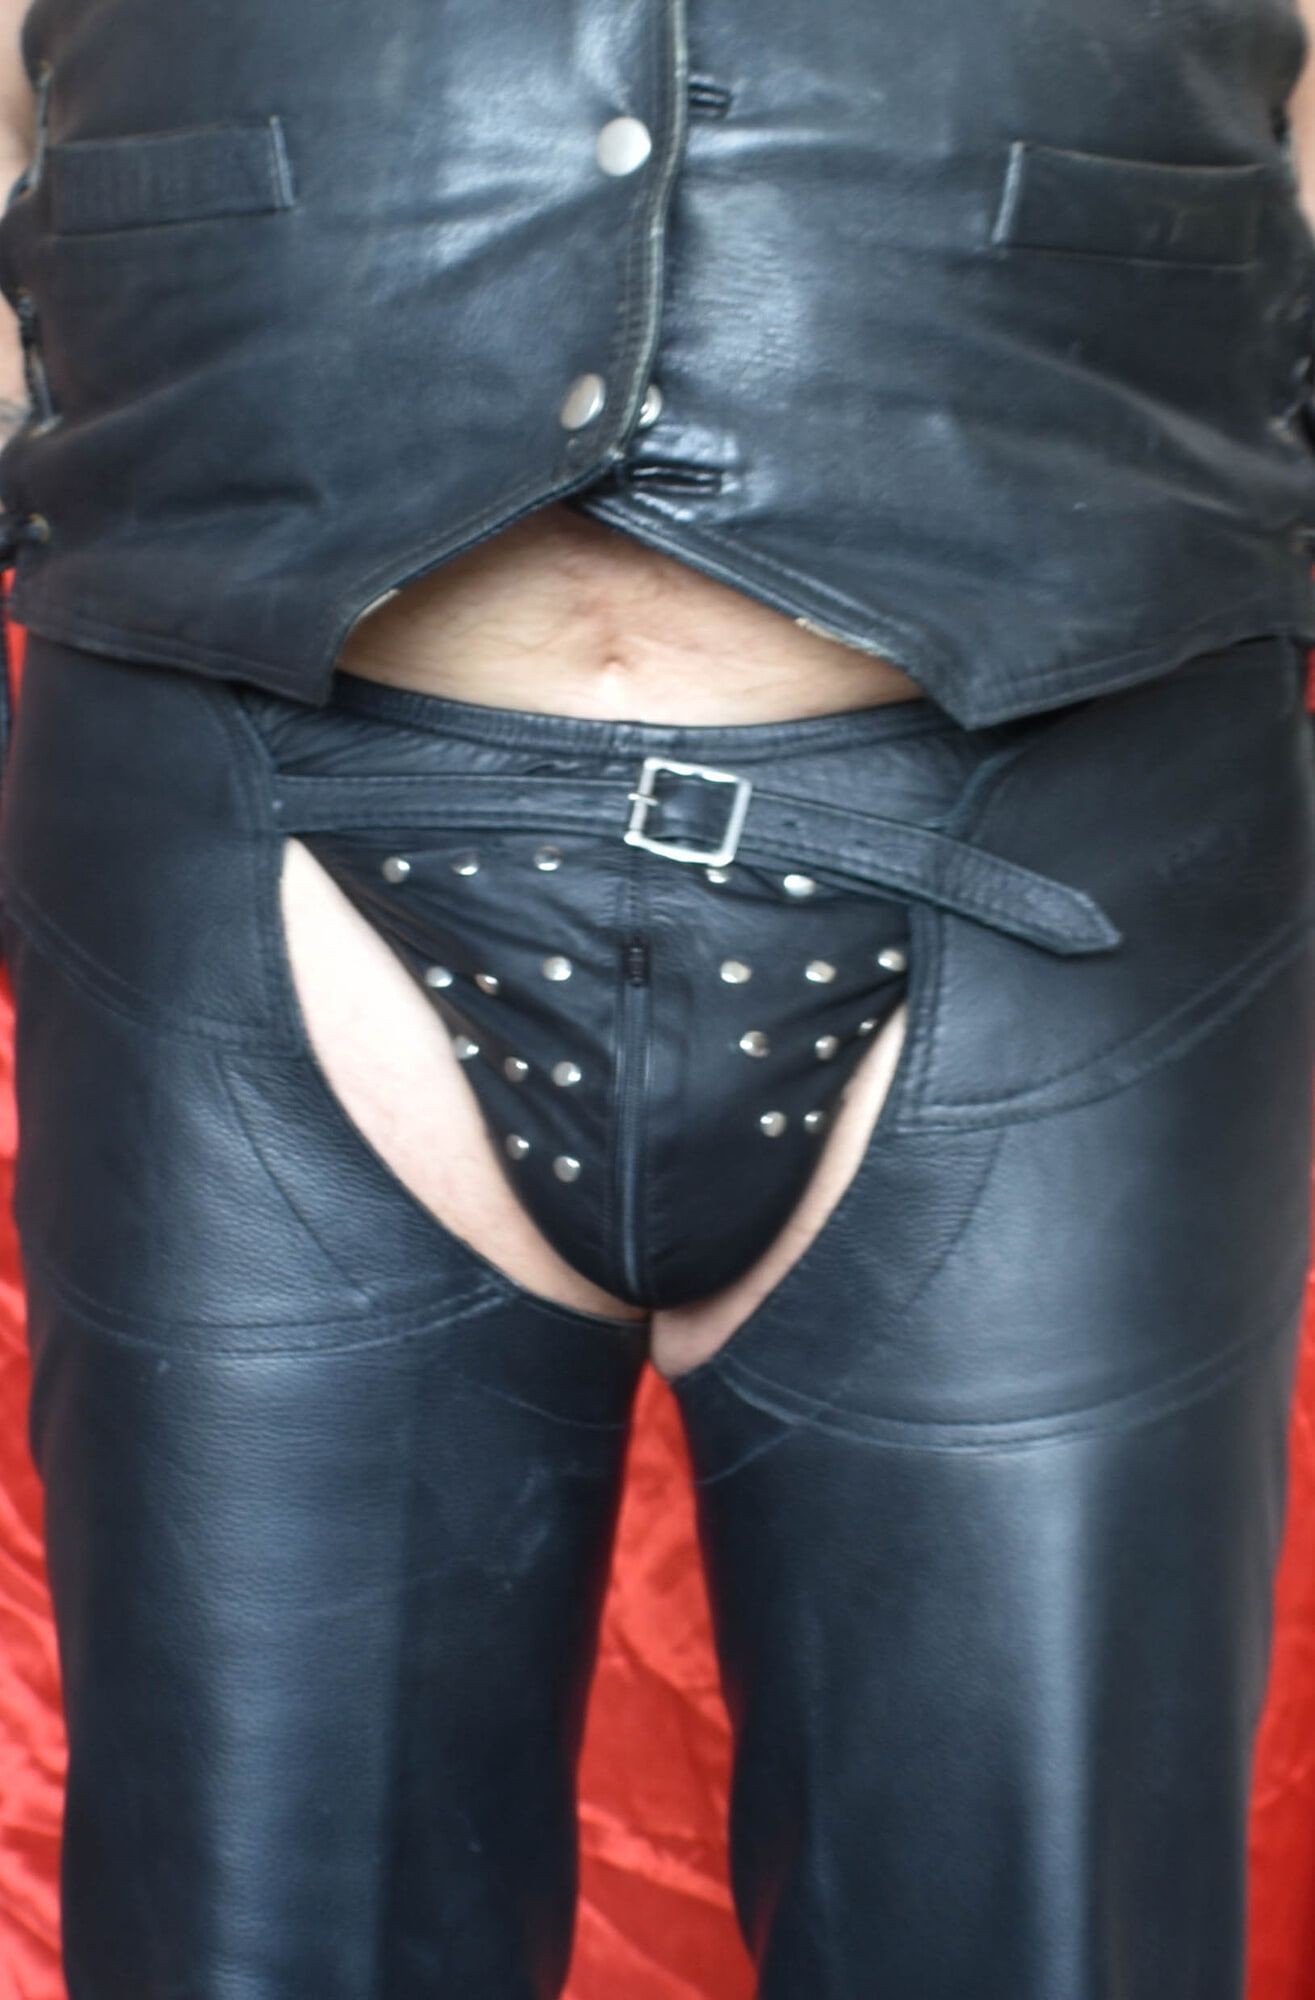 AM TO WEAR ME IN SEXY HOT LEATHER CHAPS.